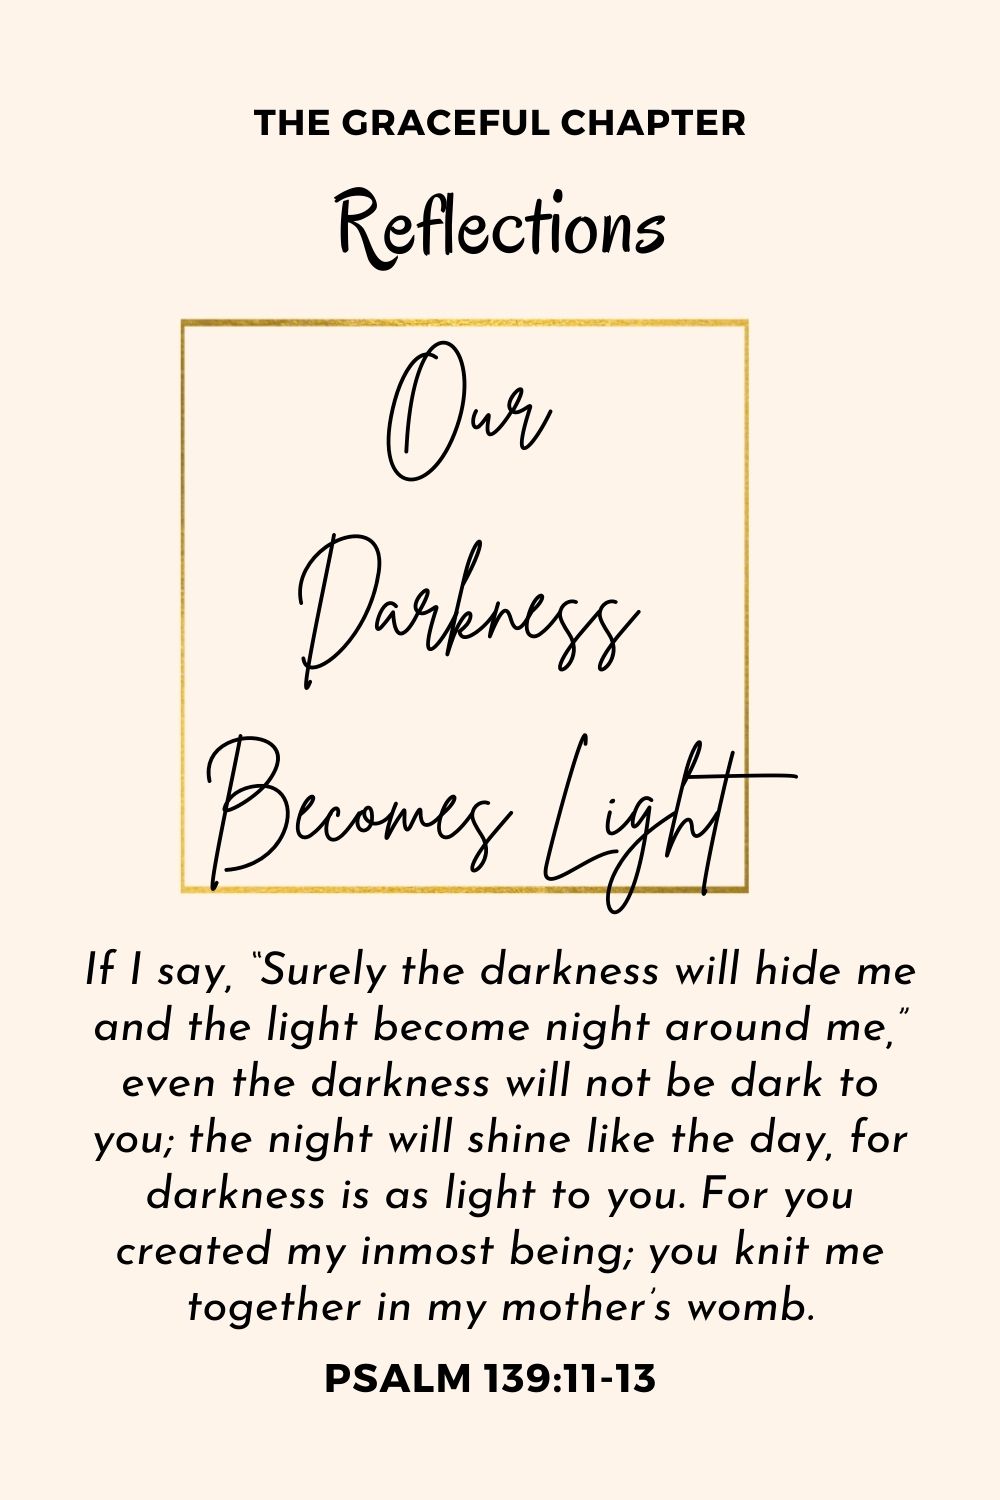 Reflection - Psalm 139:11-13 - Our Darkness Becomes Light